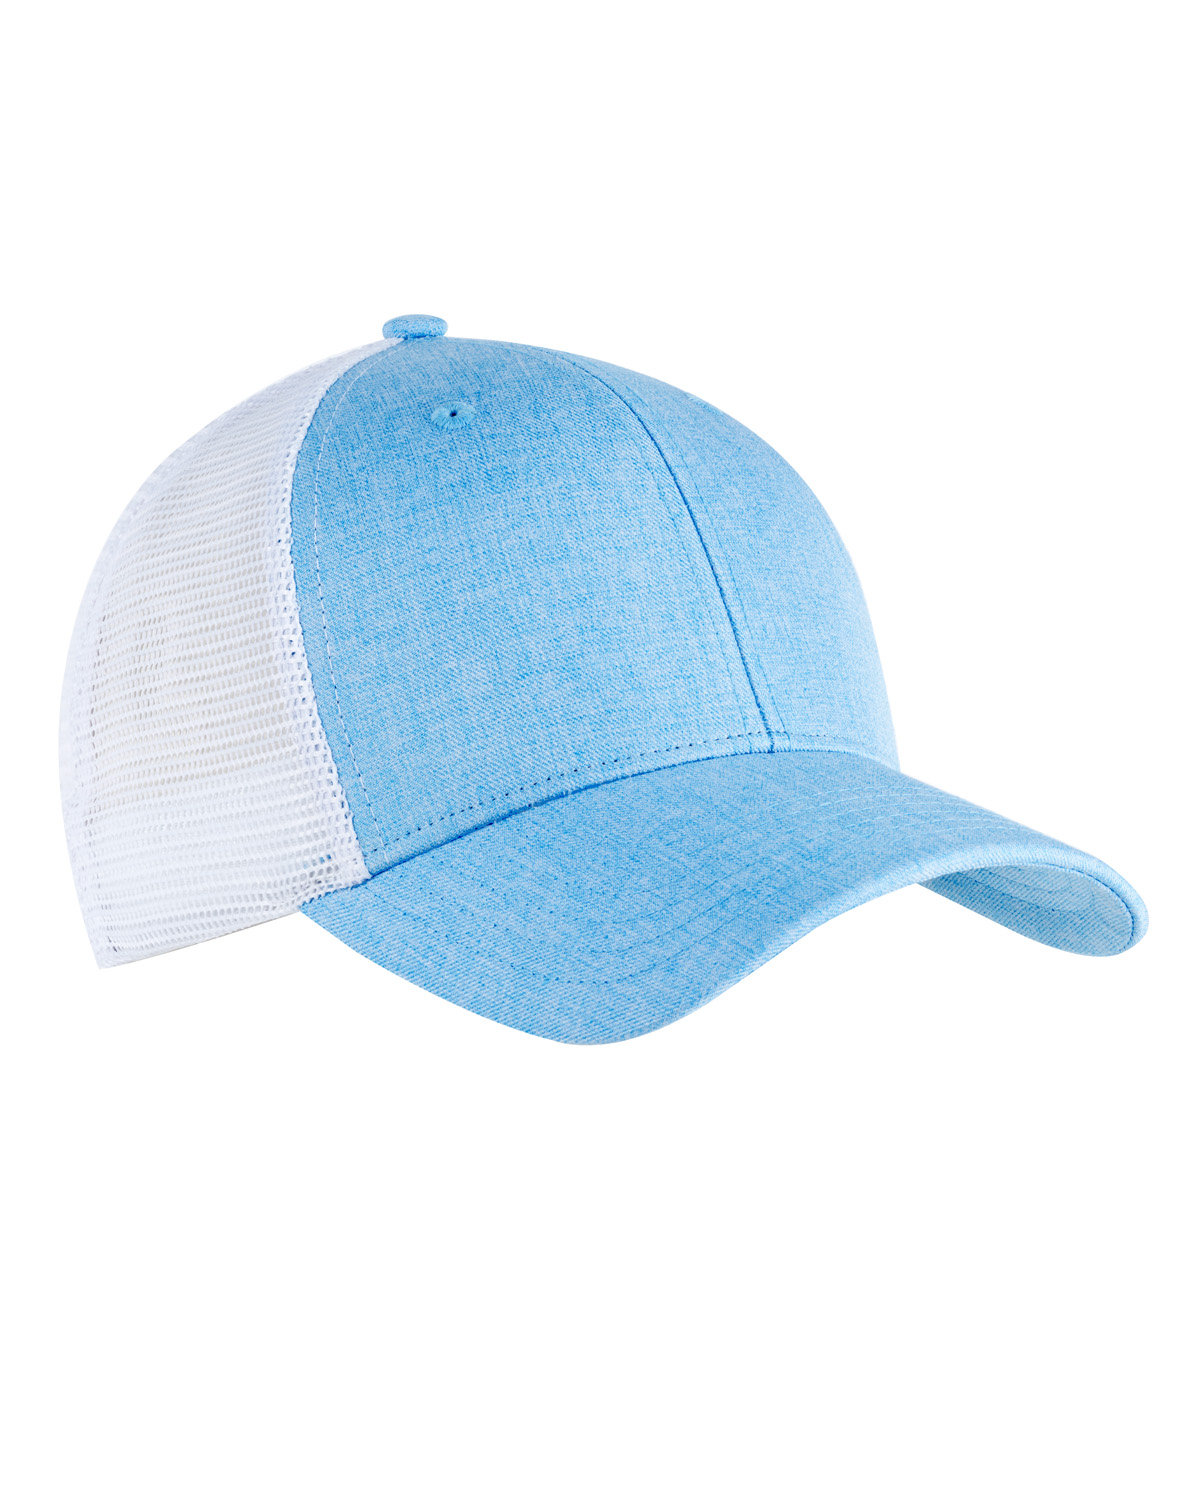 click to view Hth Lt Blu/ Wht